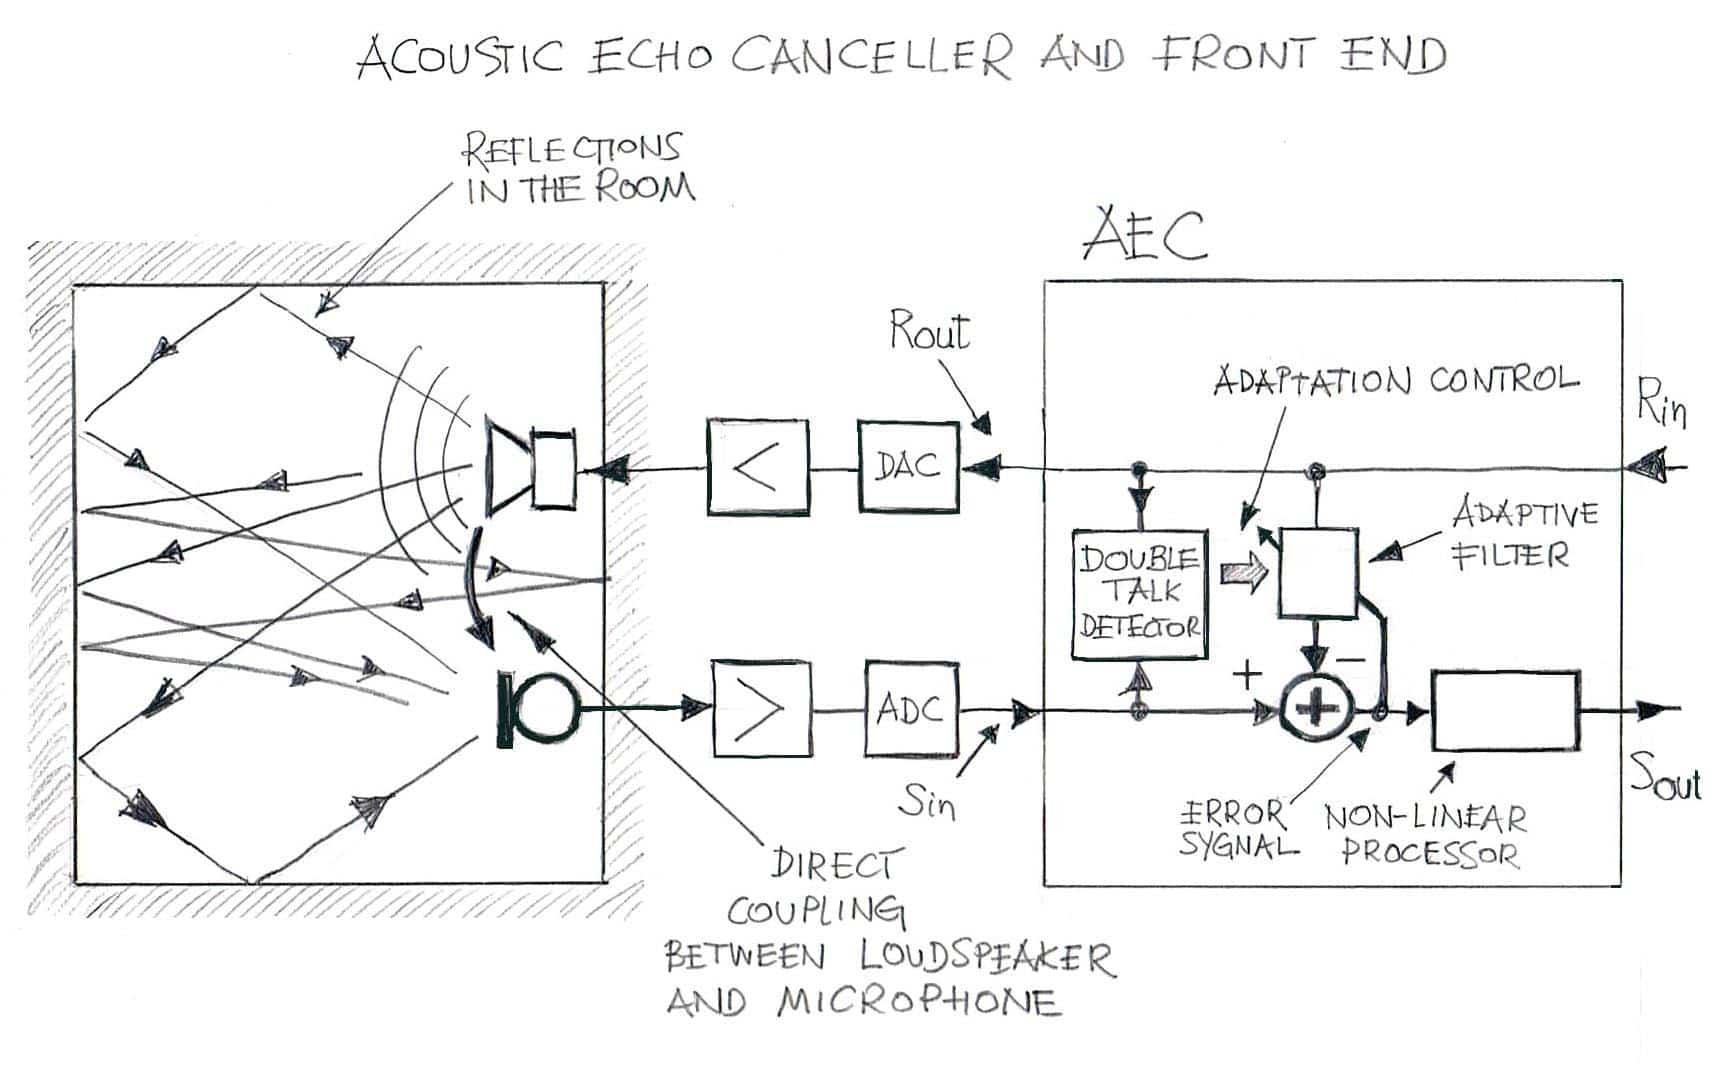 obs acoustic echo cancellation